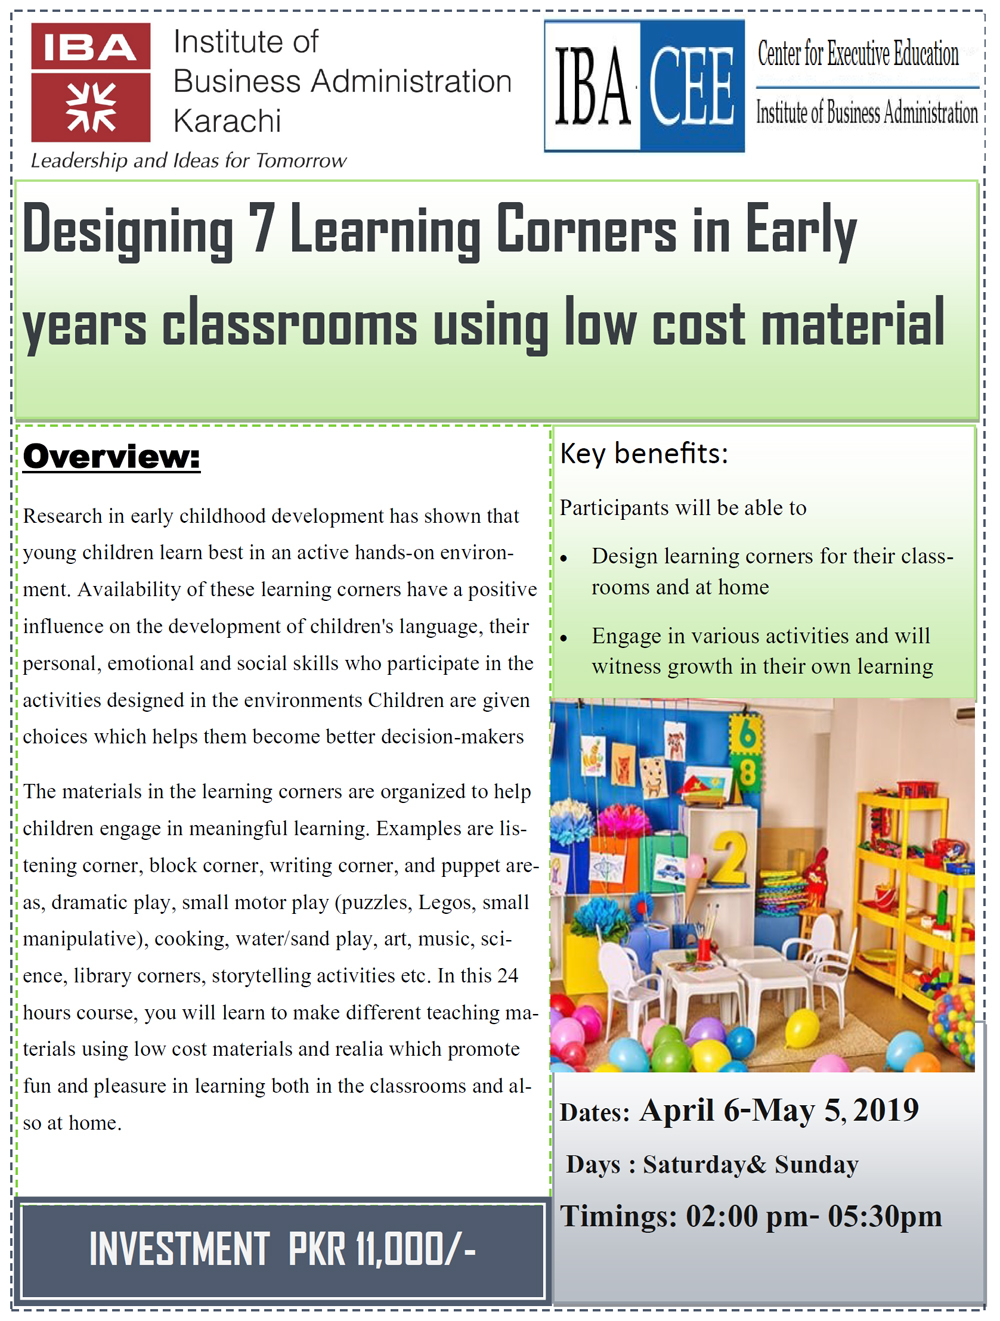 Designing 7 Learning Corners in Early years classrooms using low cost material